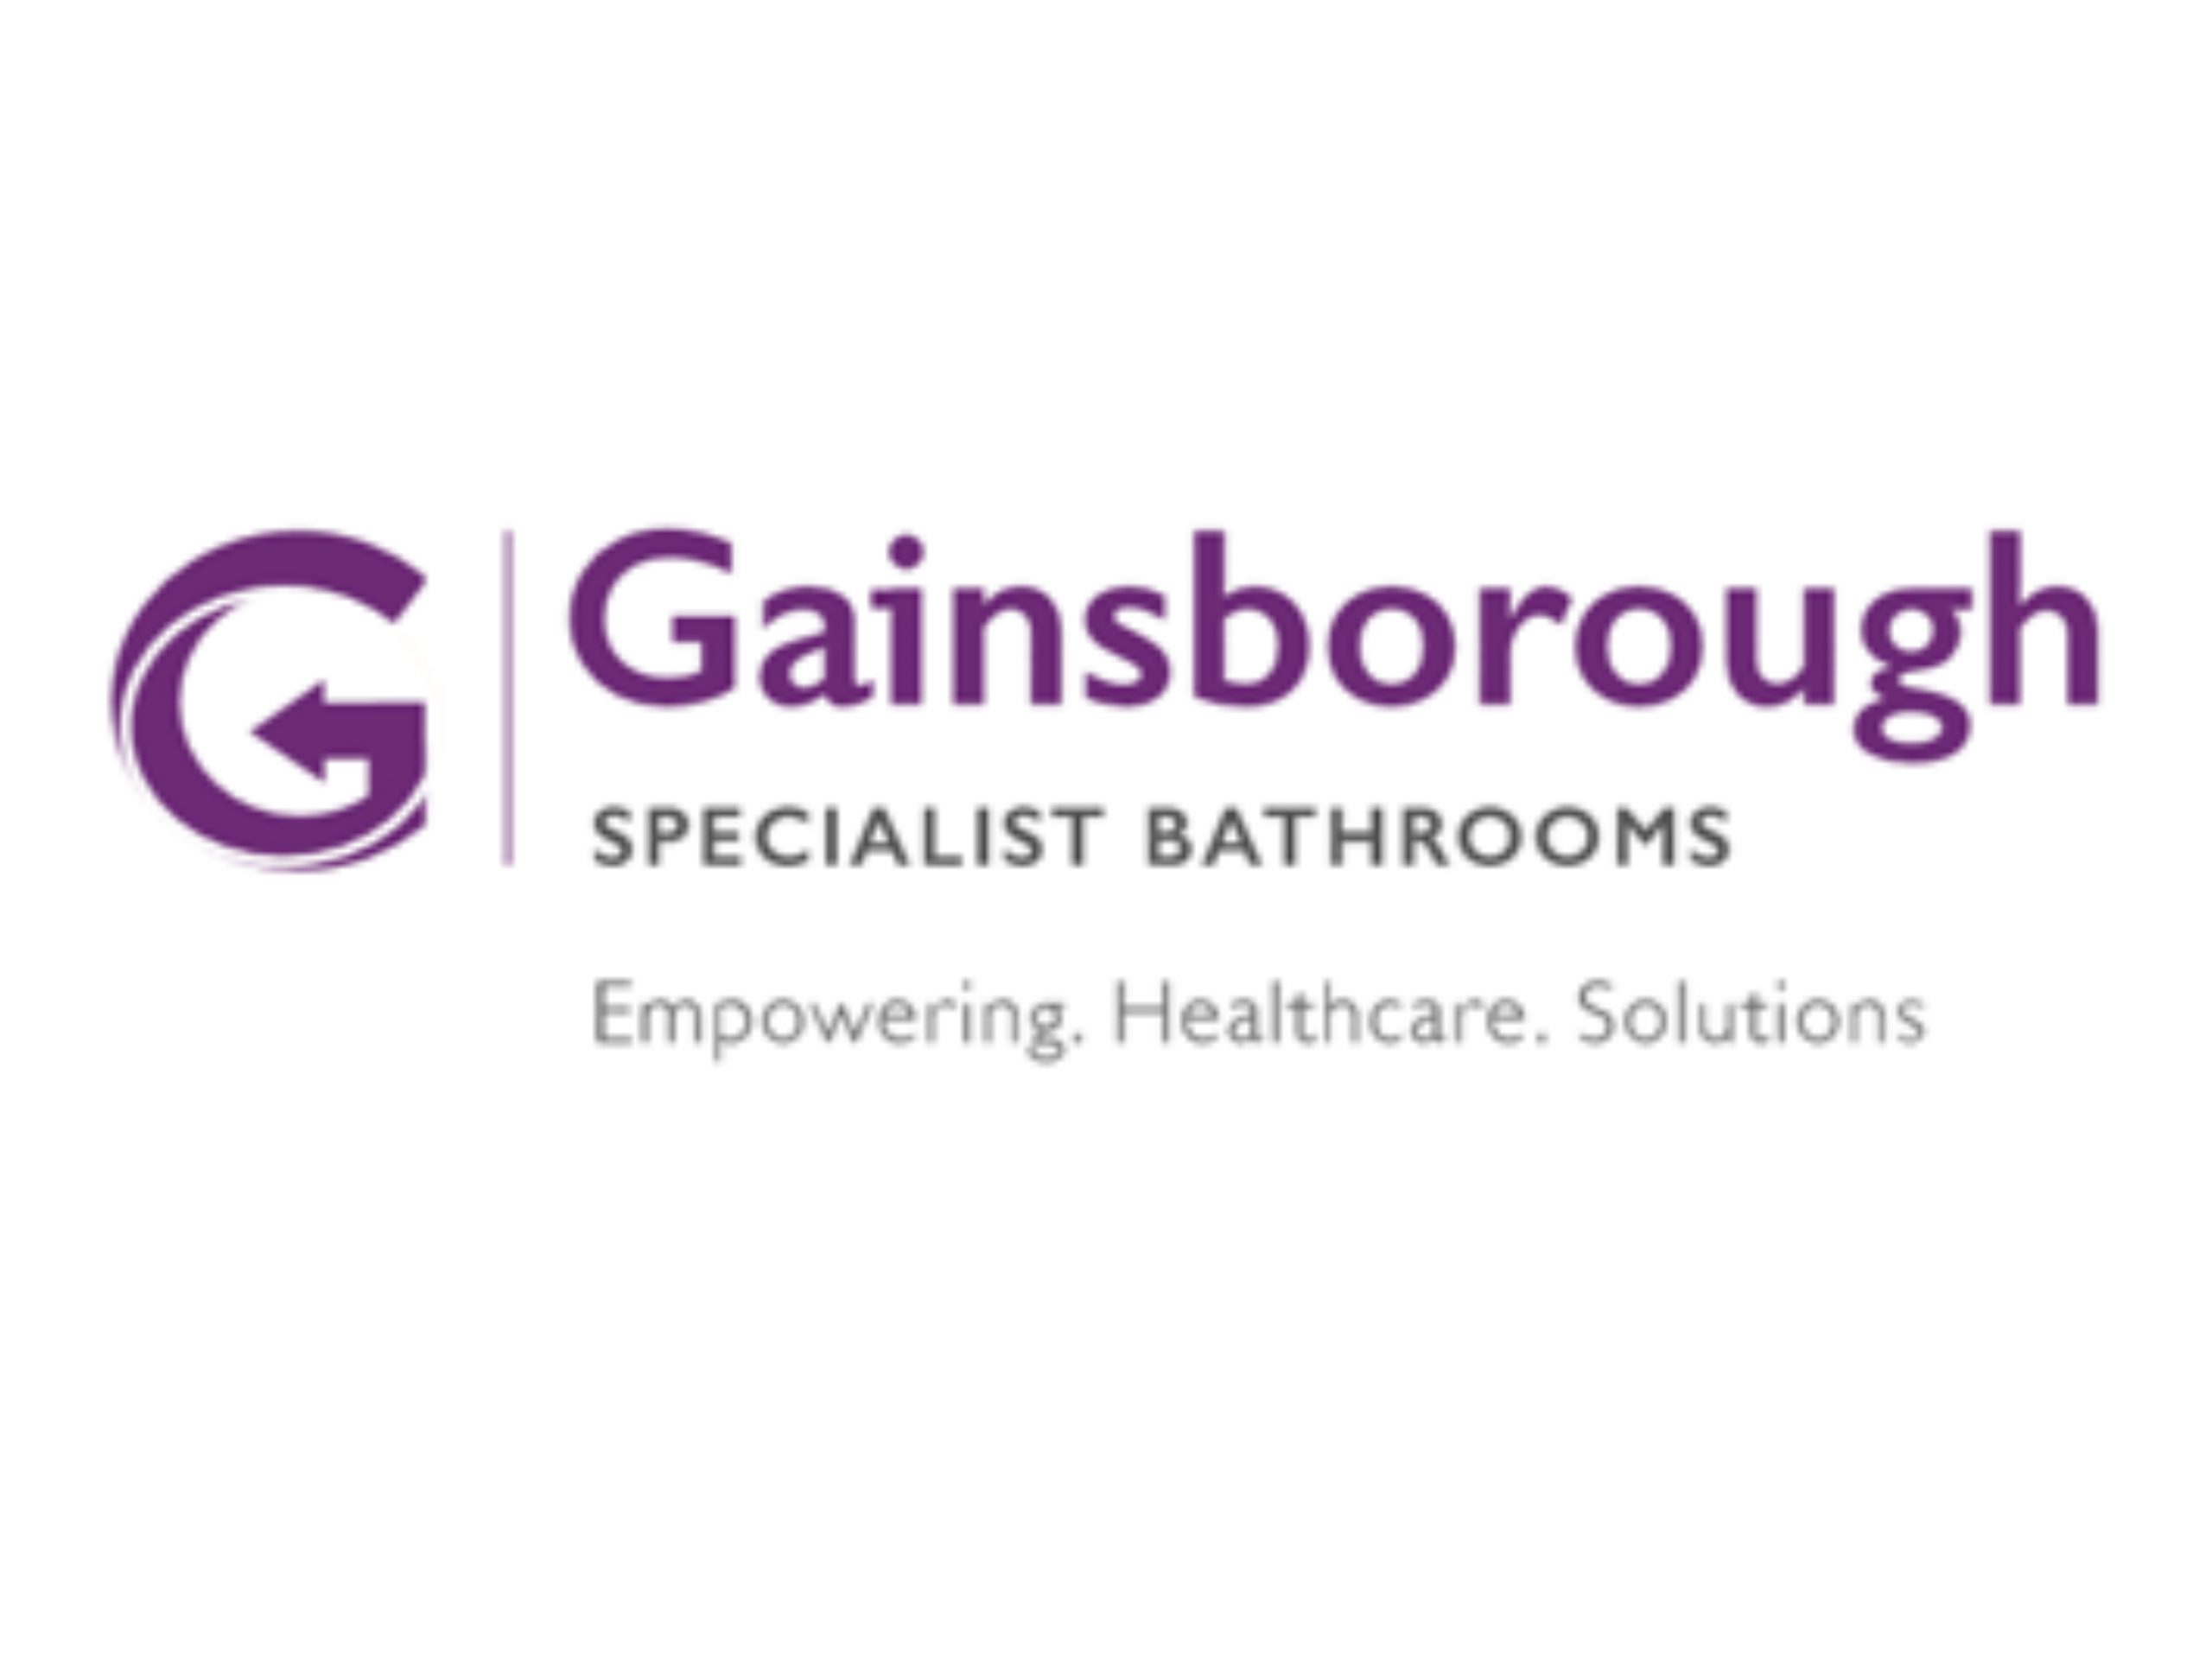 Gainsborough Specialist Bathrooms to pioneer at Care Show 2021